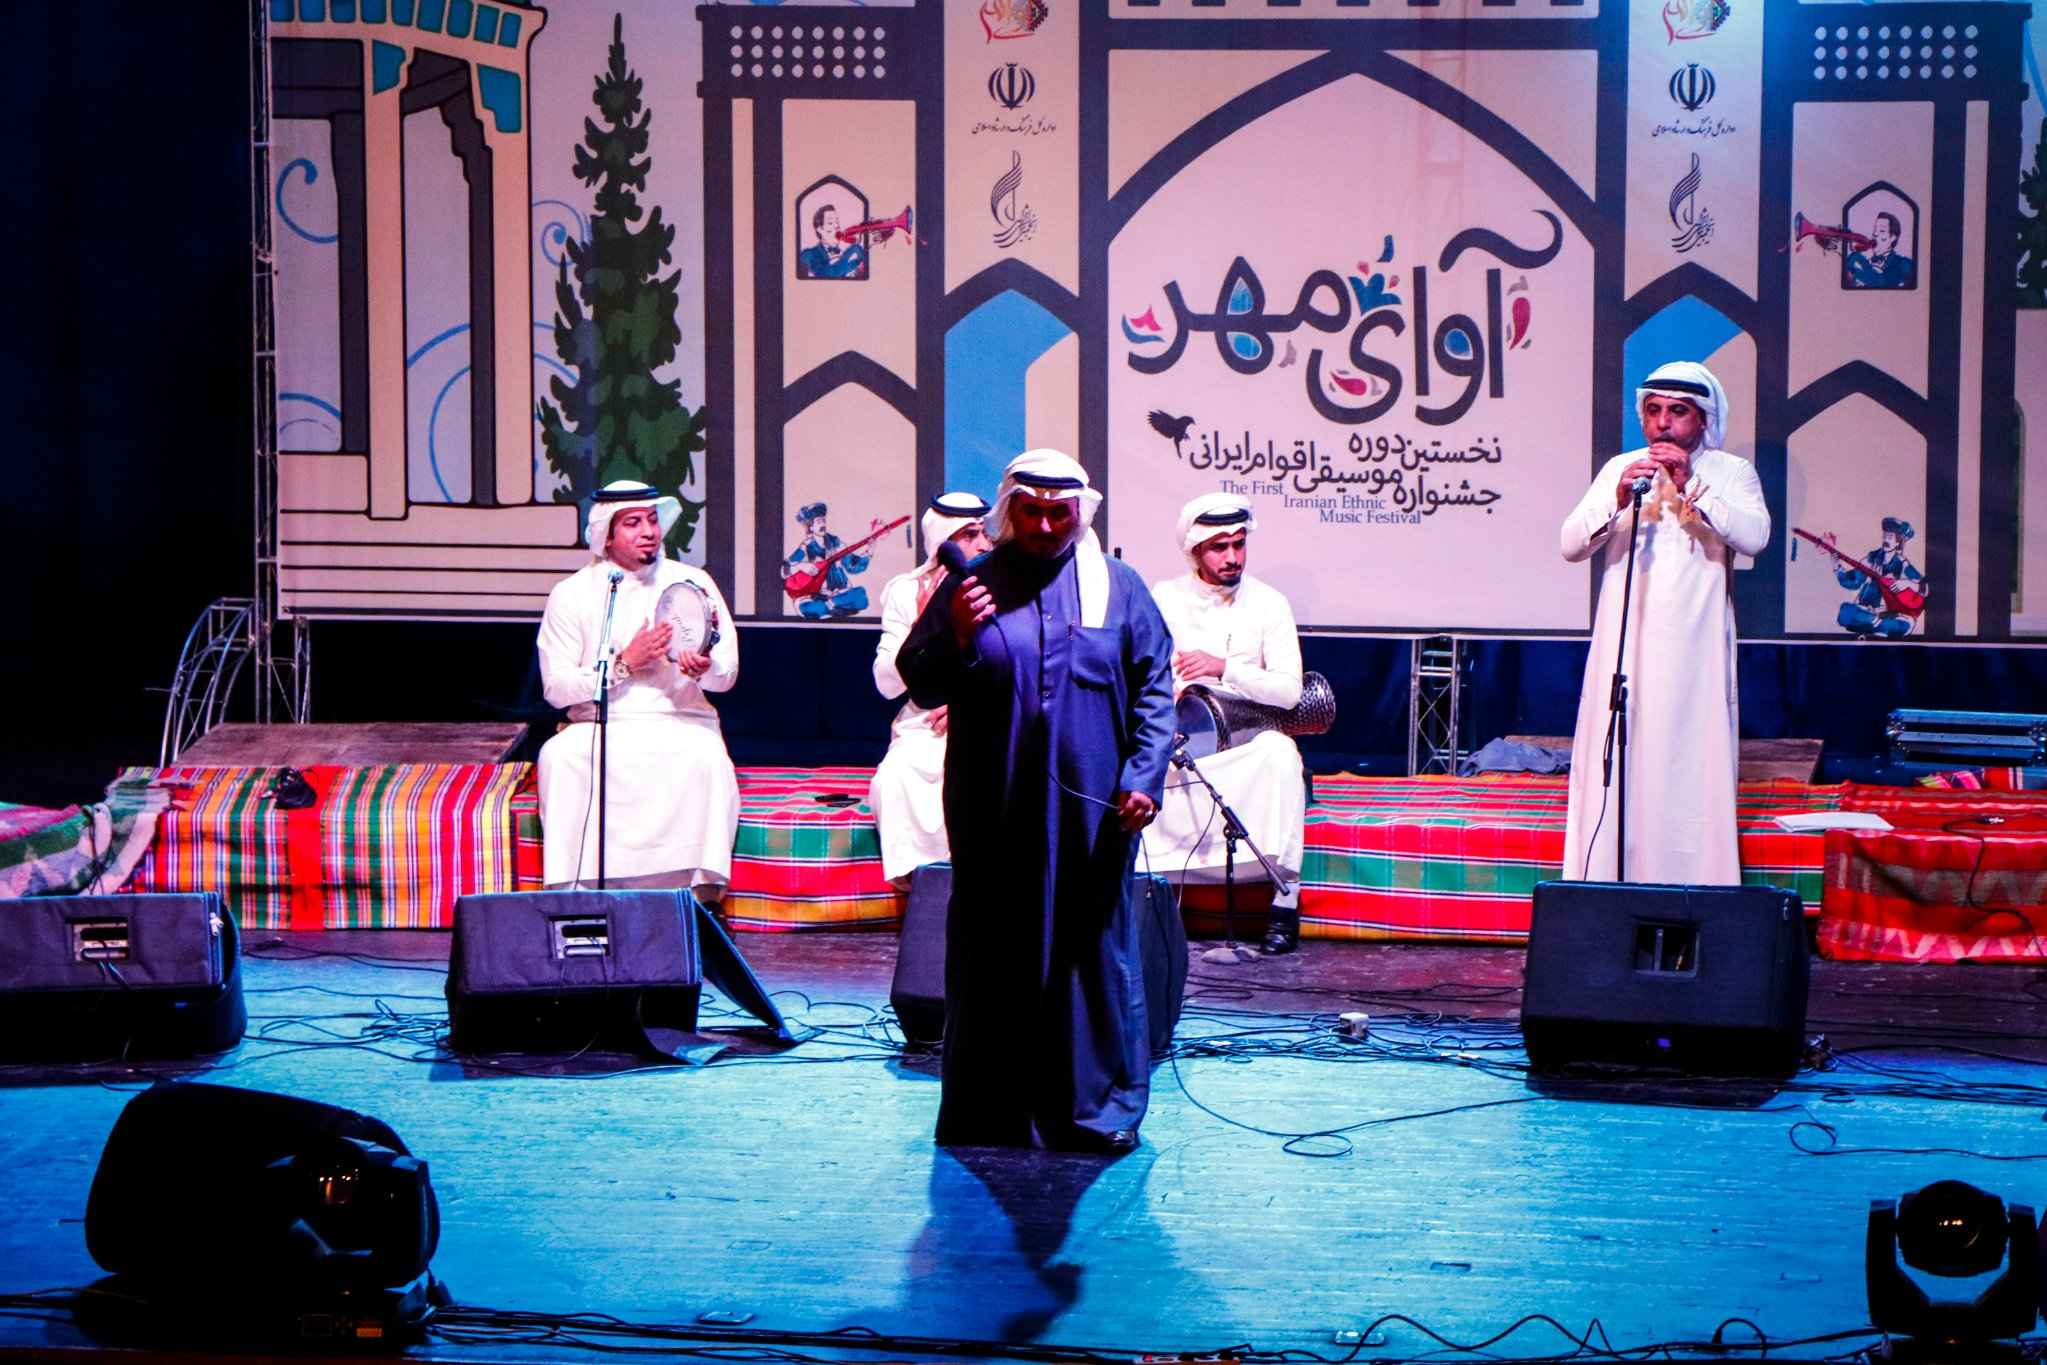 Poetry performed in the traditional gelet dialect of Arabic is often recited at the festivals by the Missan group